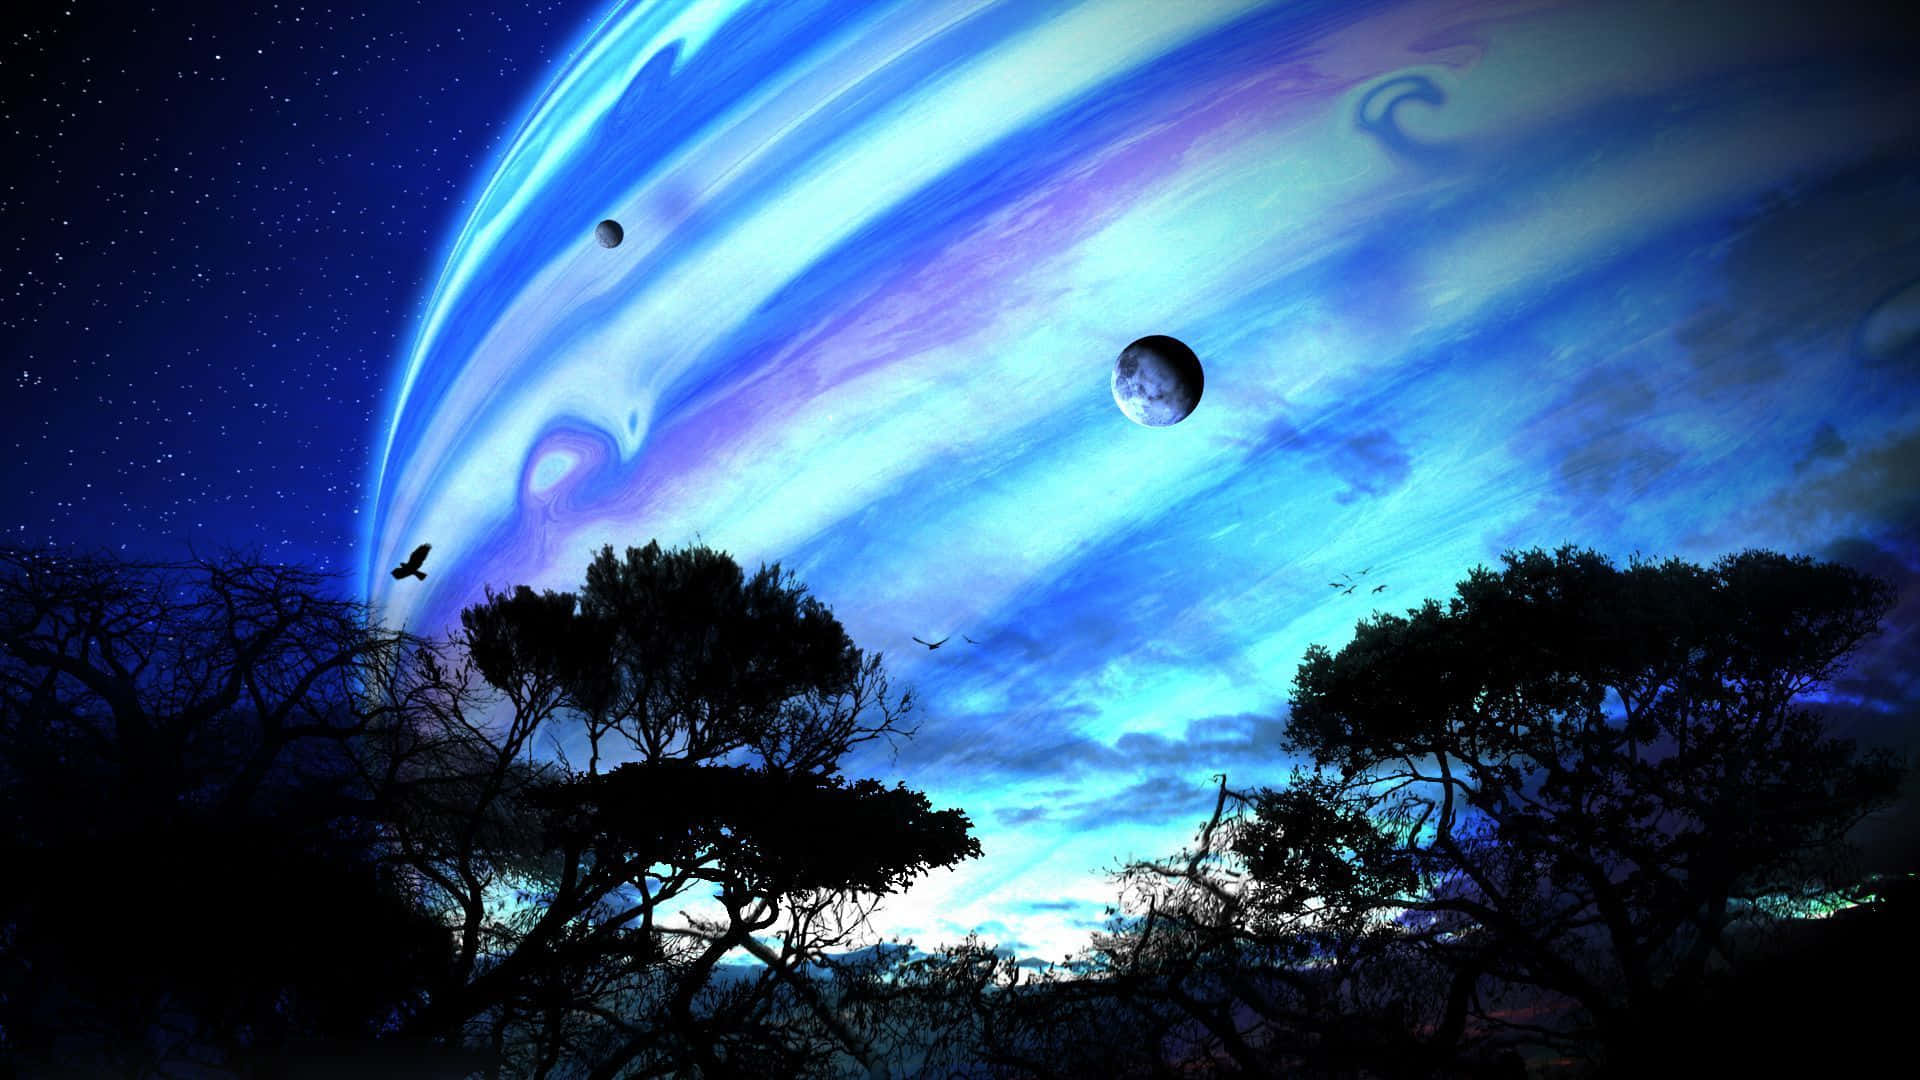 "Explore the endless possibilities of 3D Space" Wallpaper